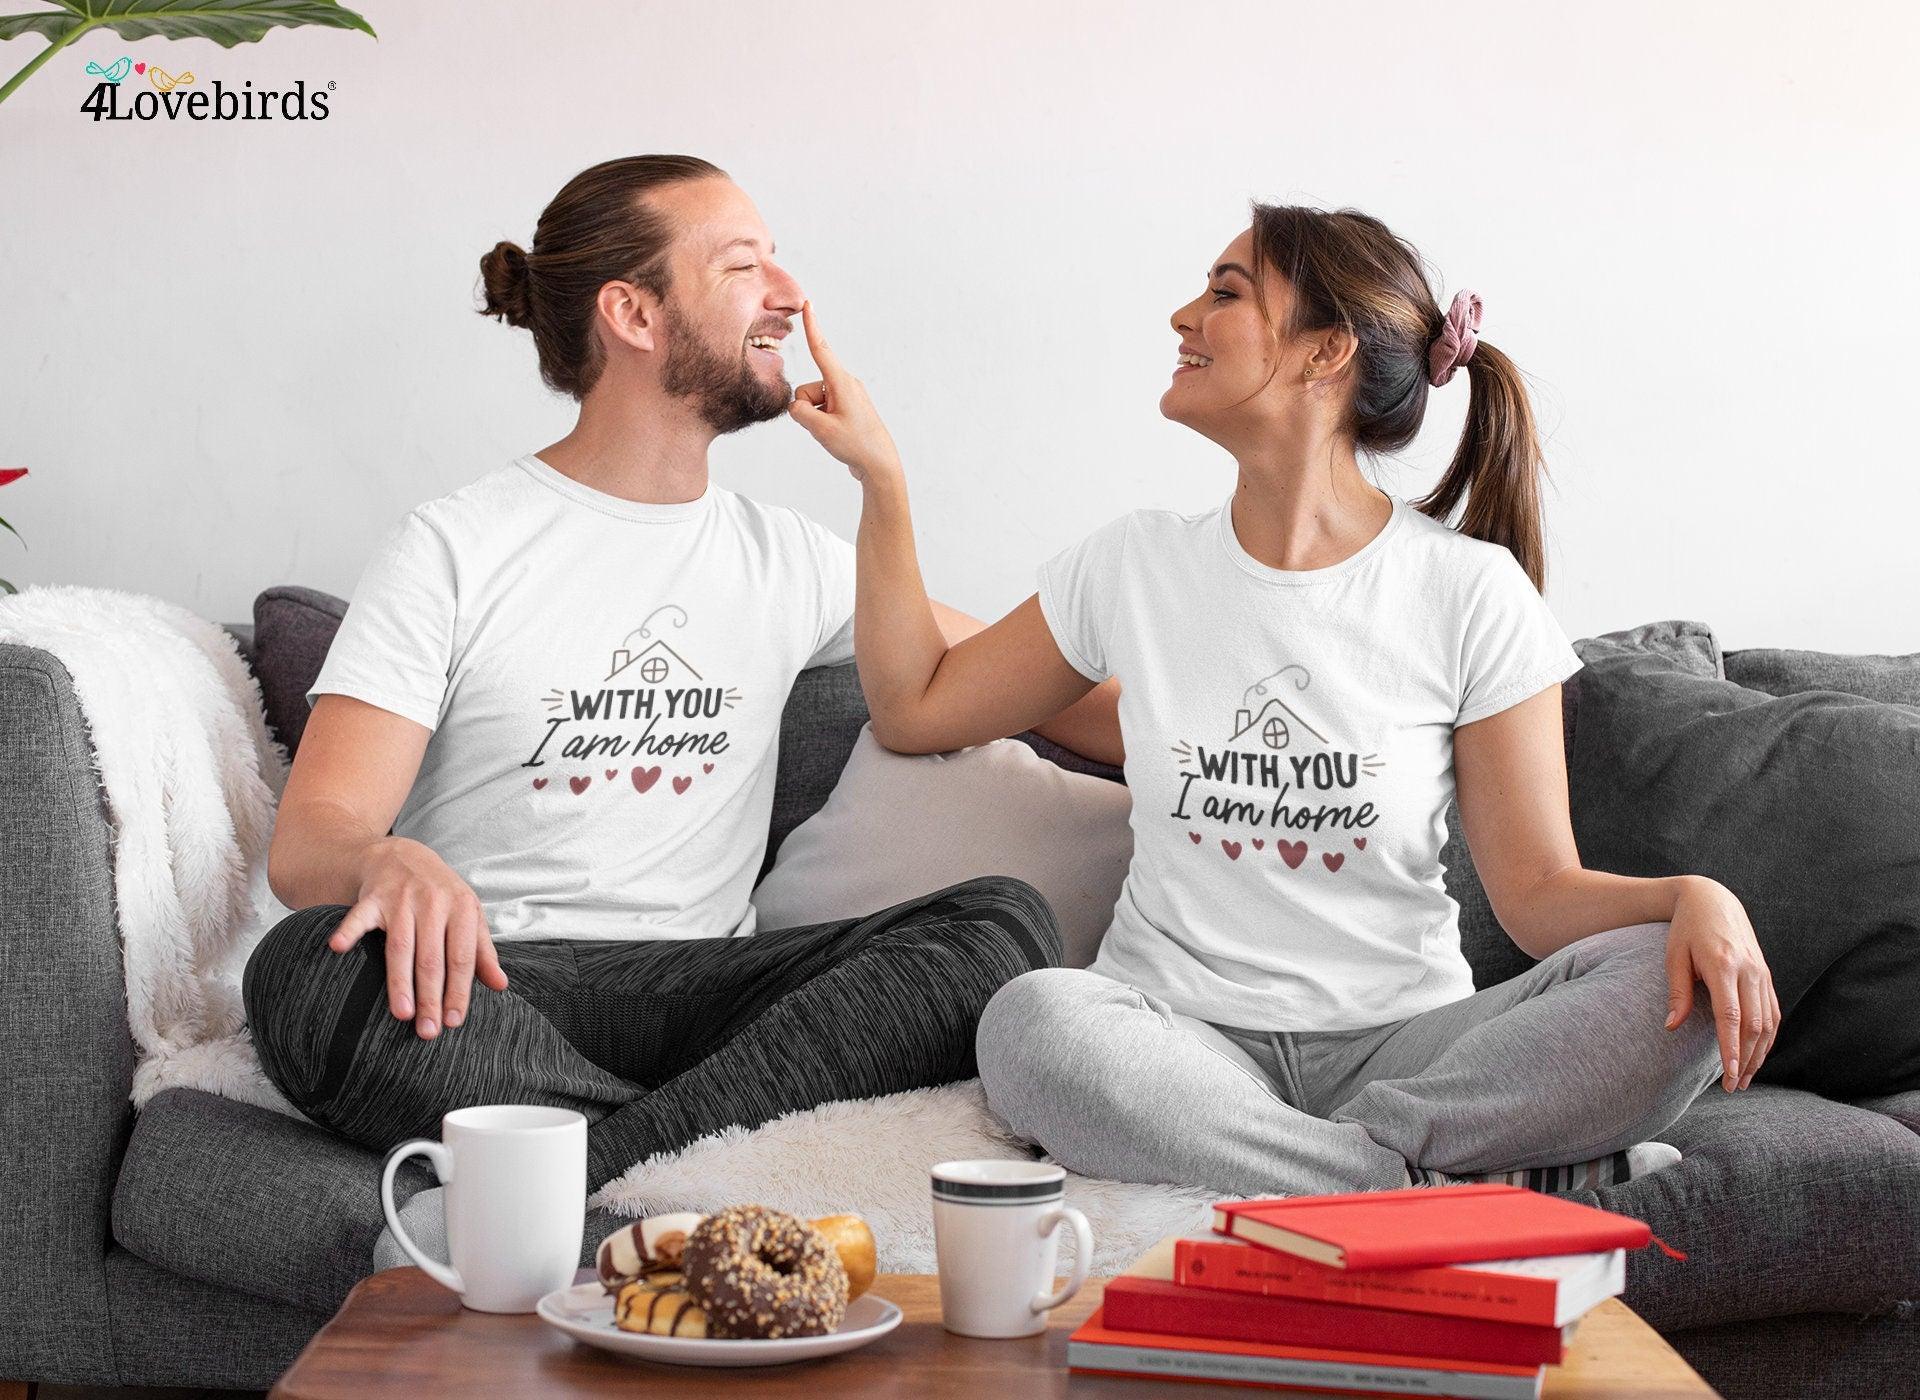 BF Gift Boyfriend Bf With You It's Different T-Shirt by Jeff Creation -  Pixels